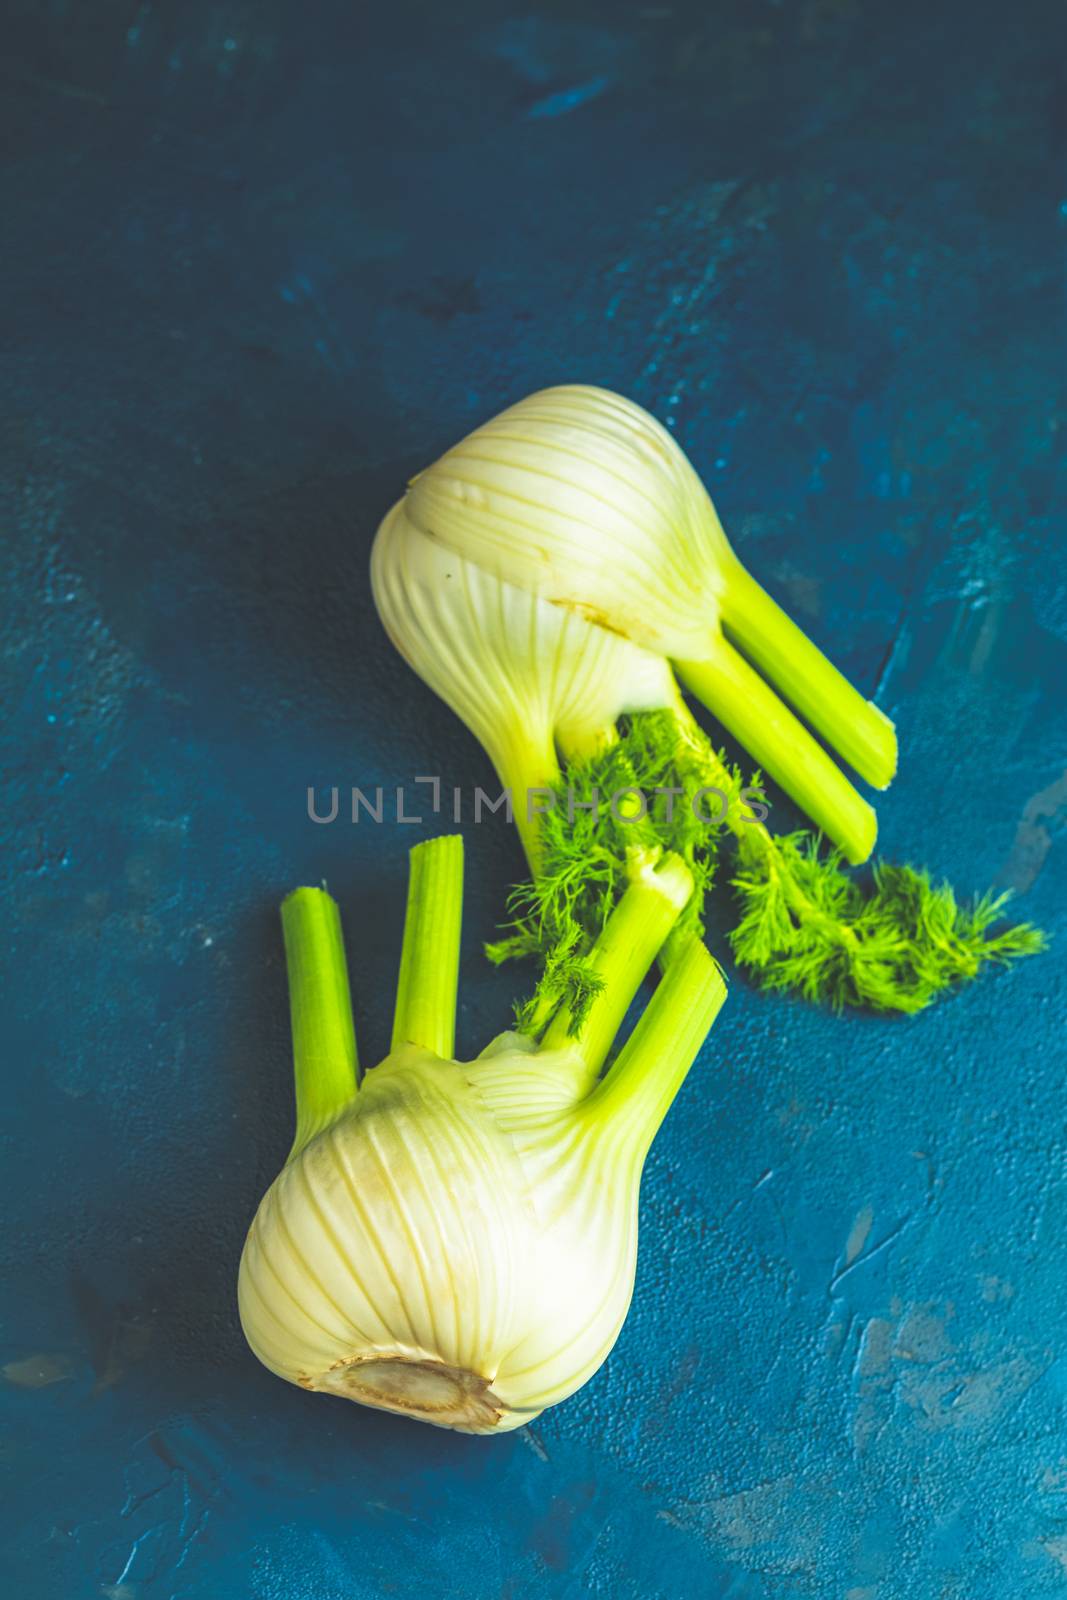 Fresh Florence fennel bulbs or Fennel bulb on dark blue concrete background. Healthy and benefits of Florence fennel bulbs.